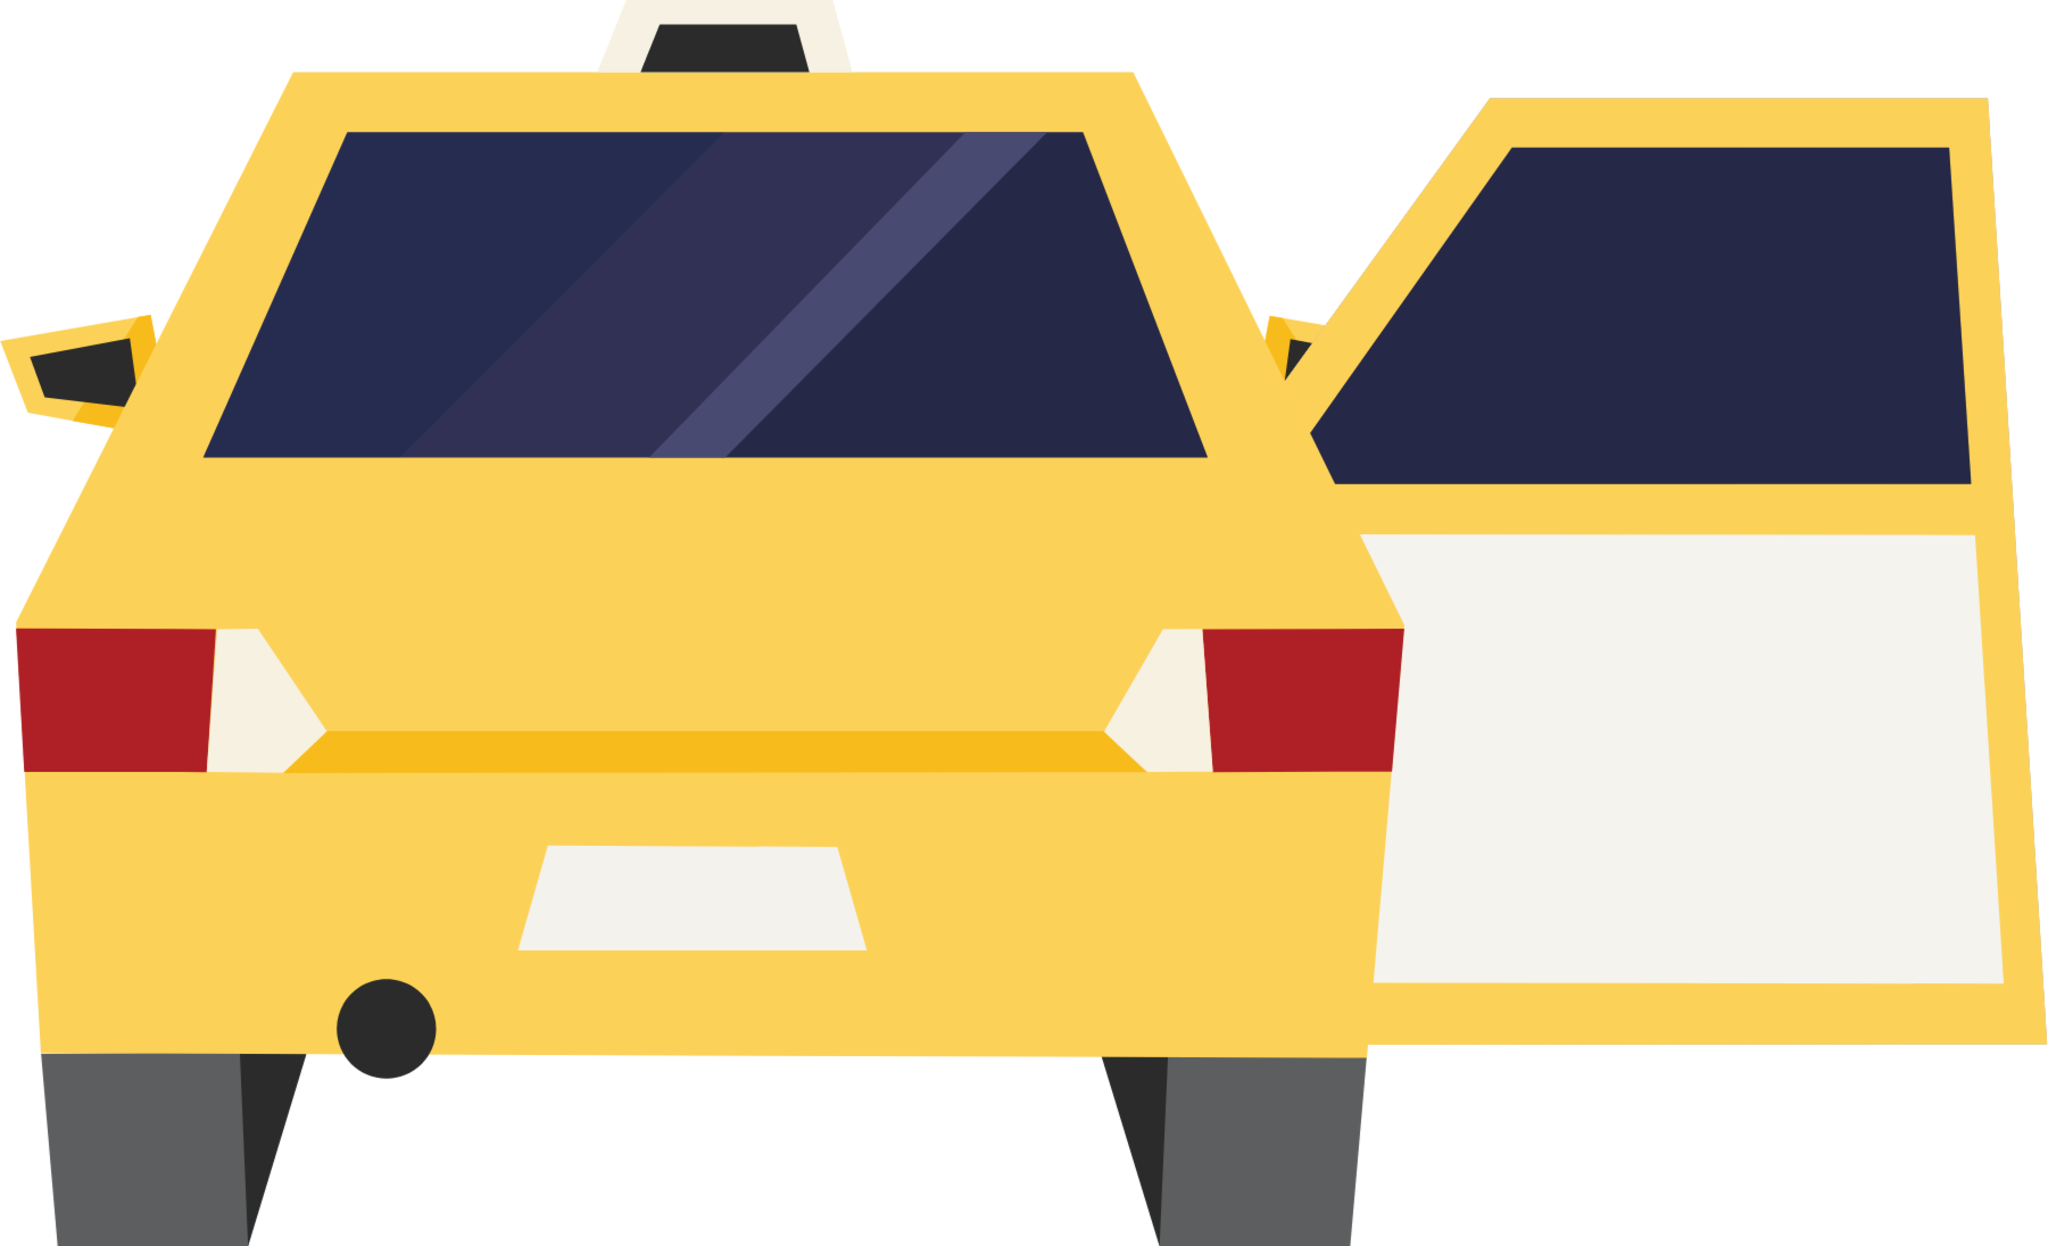 taxi outbound door right illustration